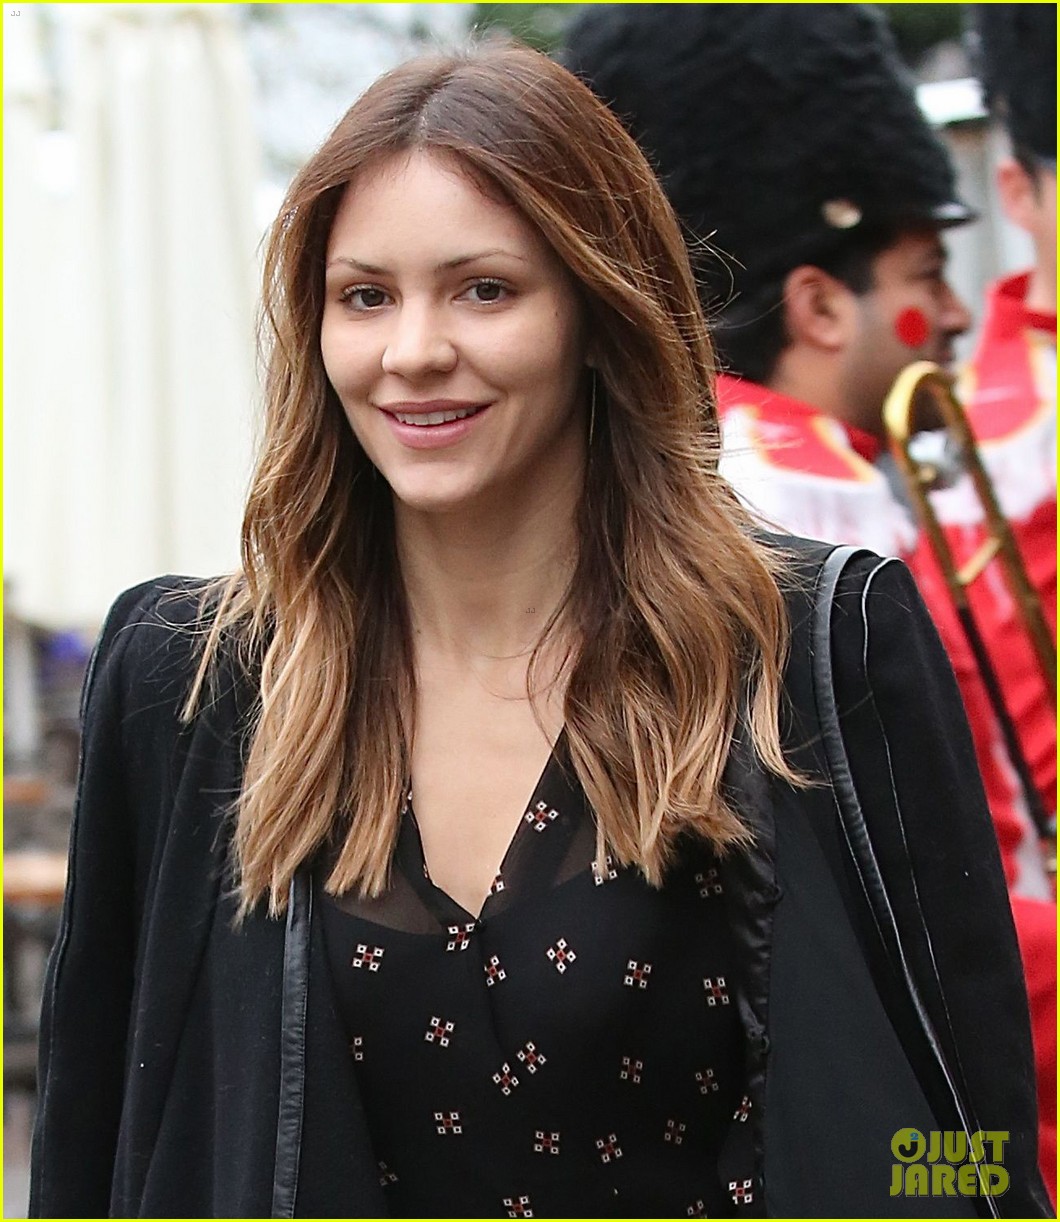 katharine mcphee wants you to help her build schools for children in need 09